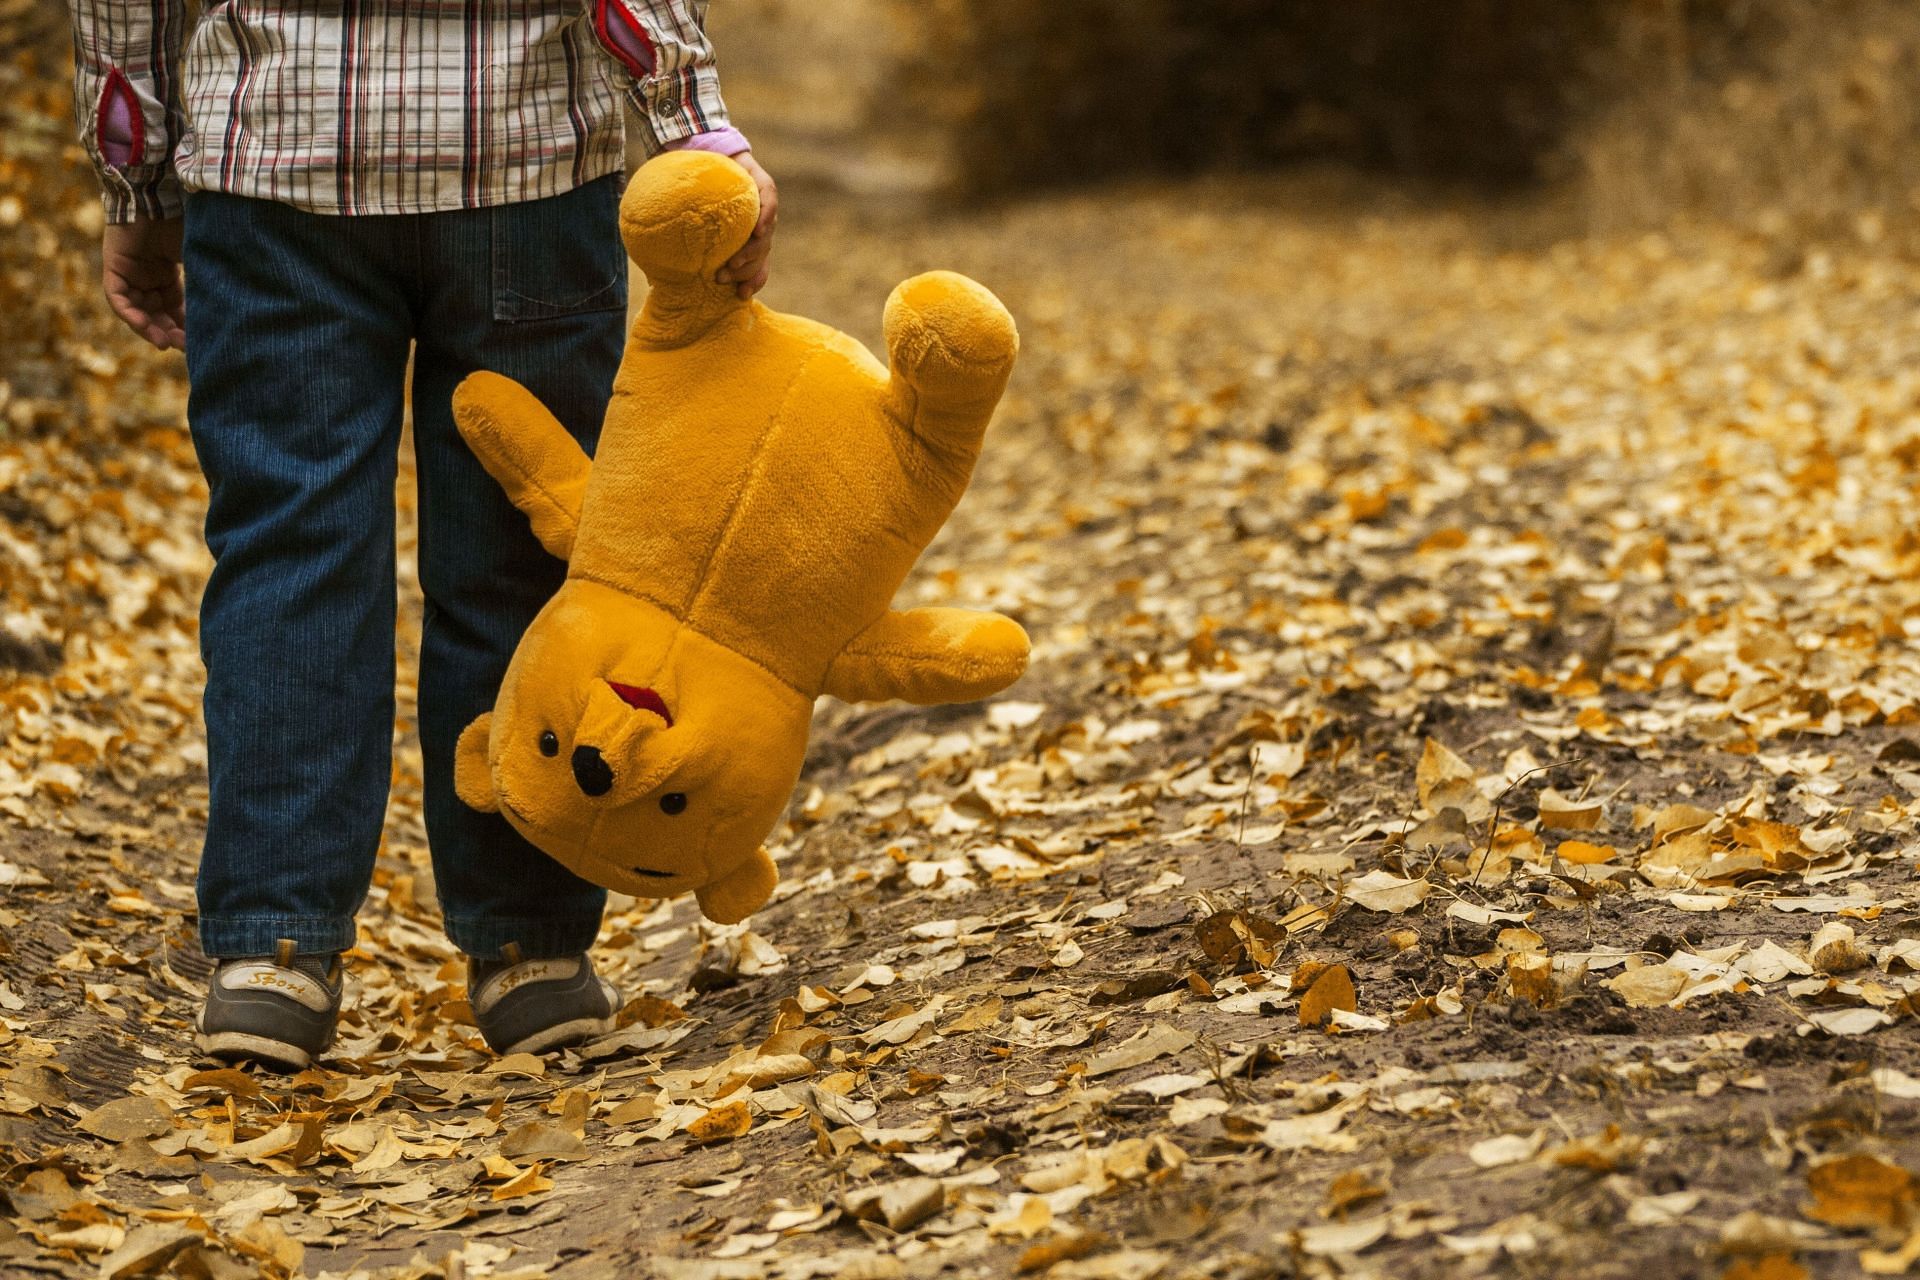 What does the winnie the pooh mental illness theory have to say about each character? (Image via Pexels/ Inna)